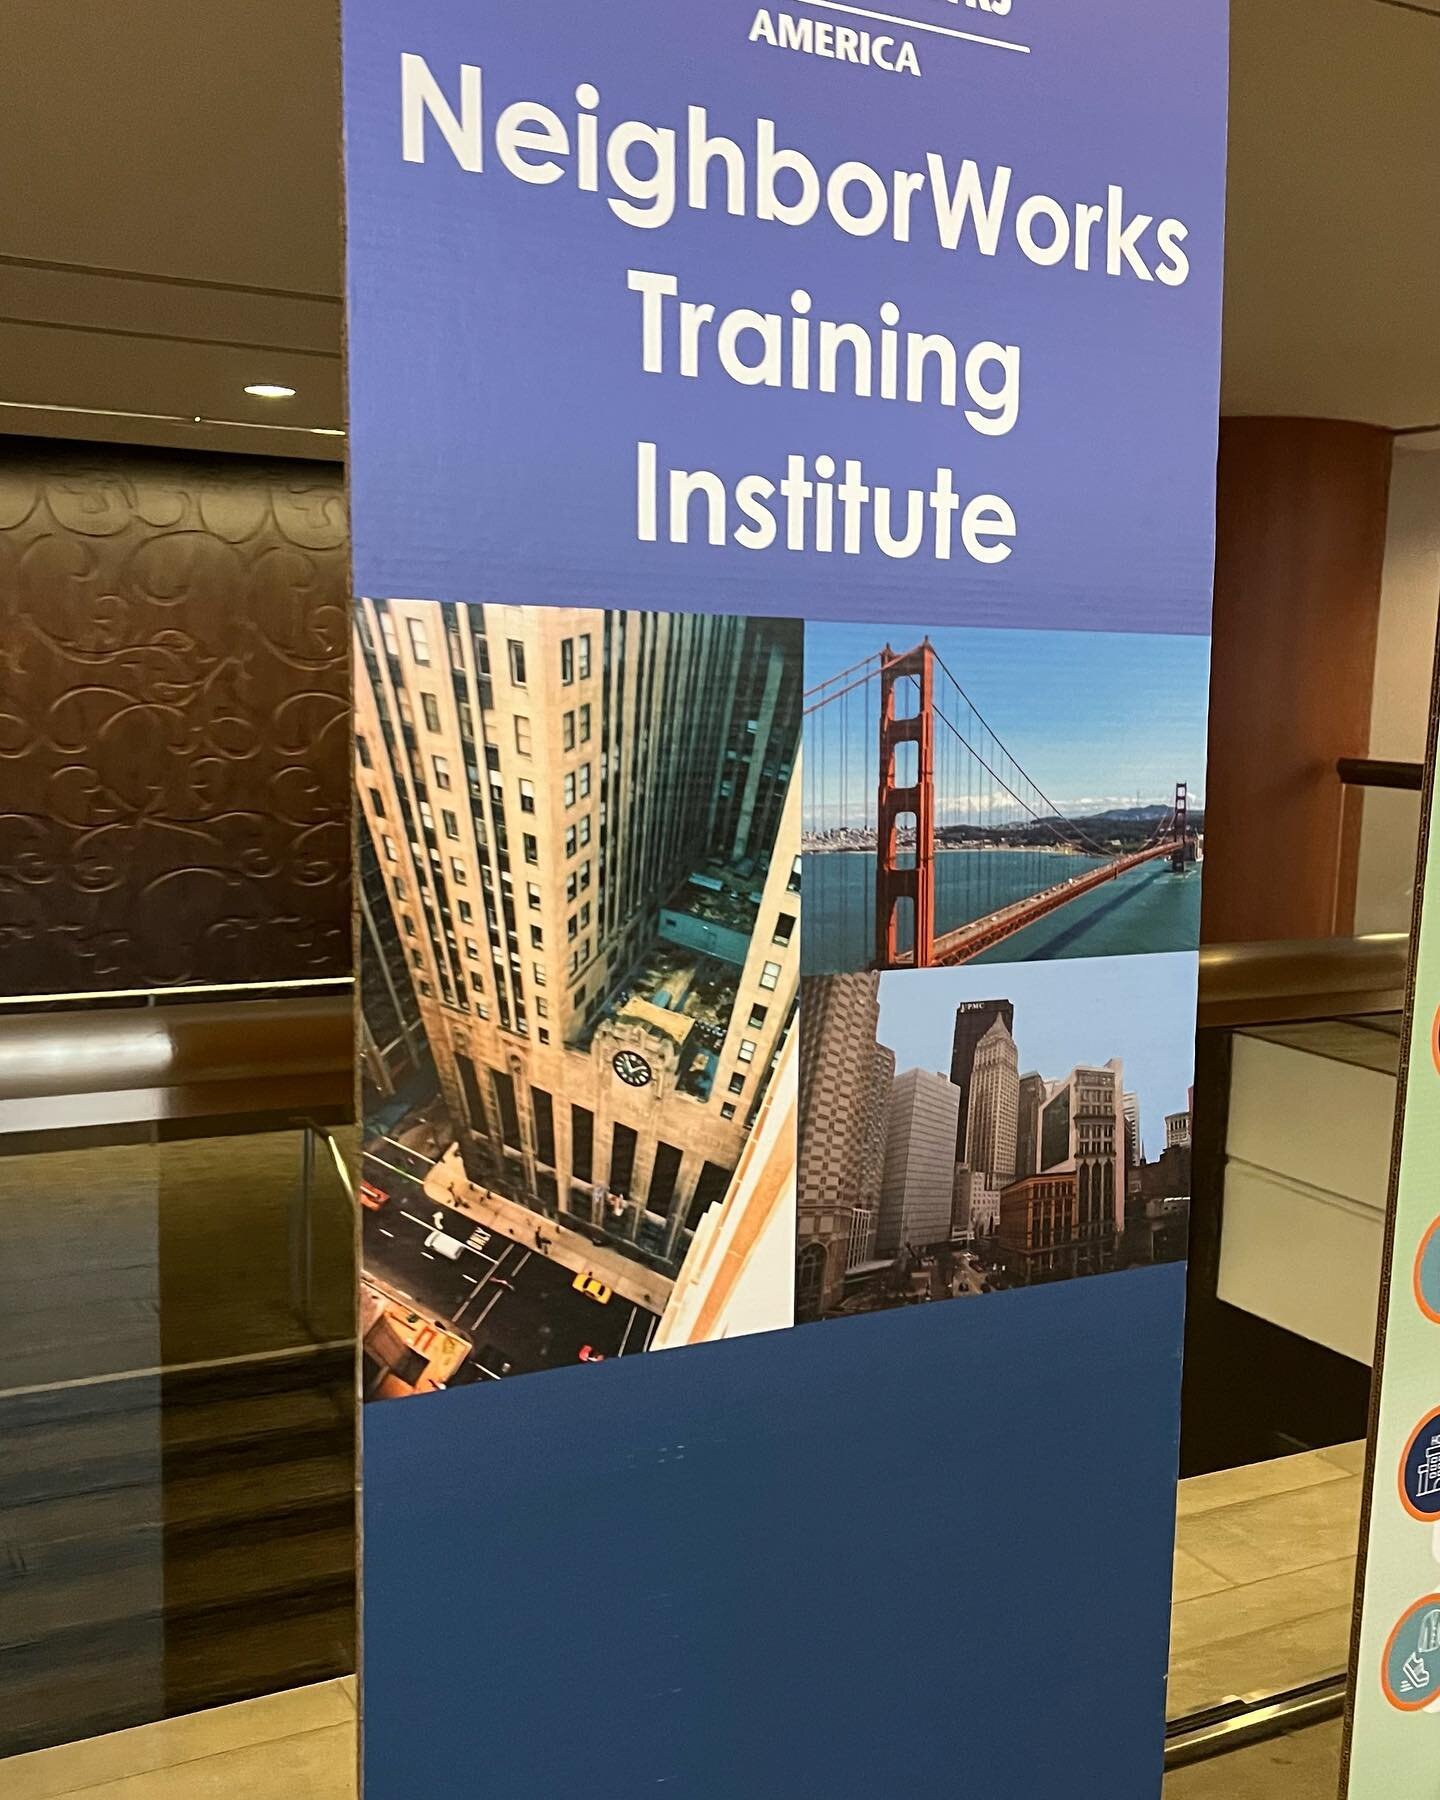 Proud to be @neighborworks network partner. Several of our staff are spending time learning, building partnerships, and connecting on affordable housing in San Francisco. @neighborworks #neighborworkspartner #affordablehousing